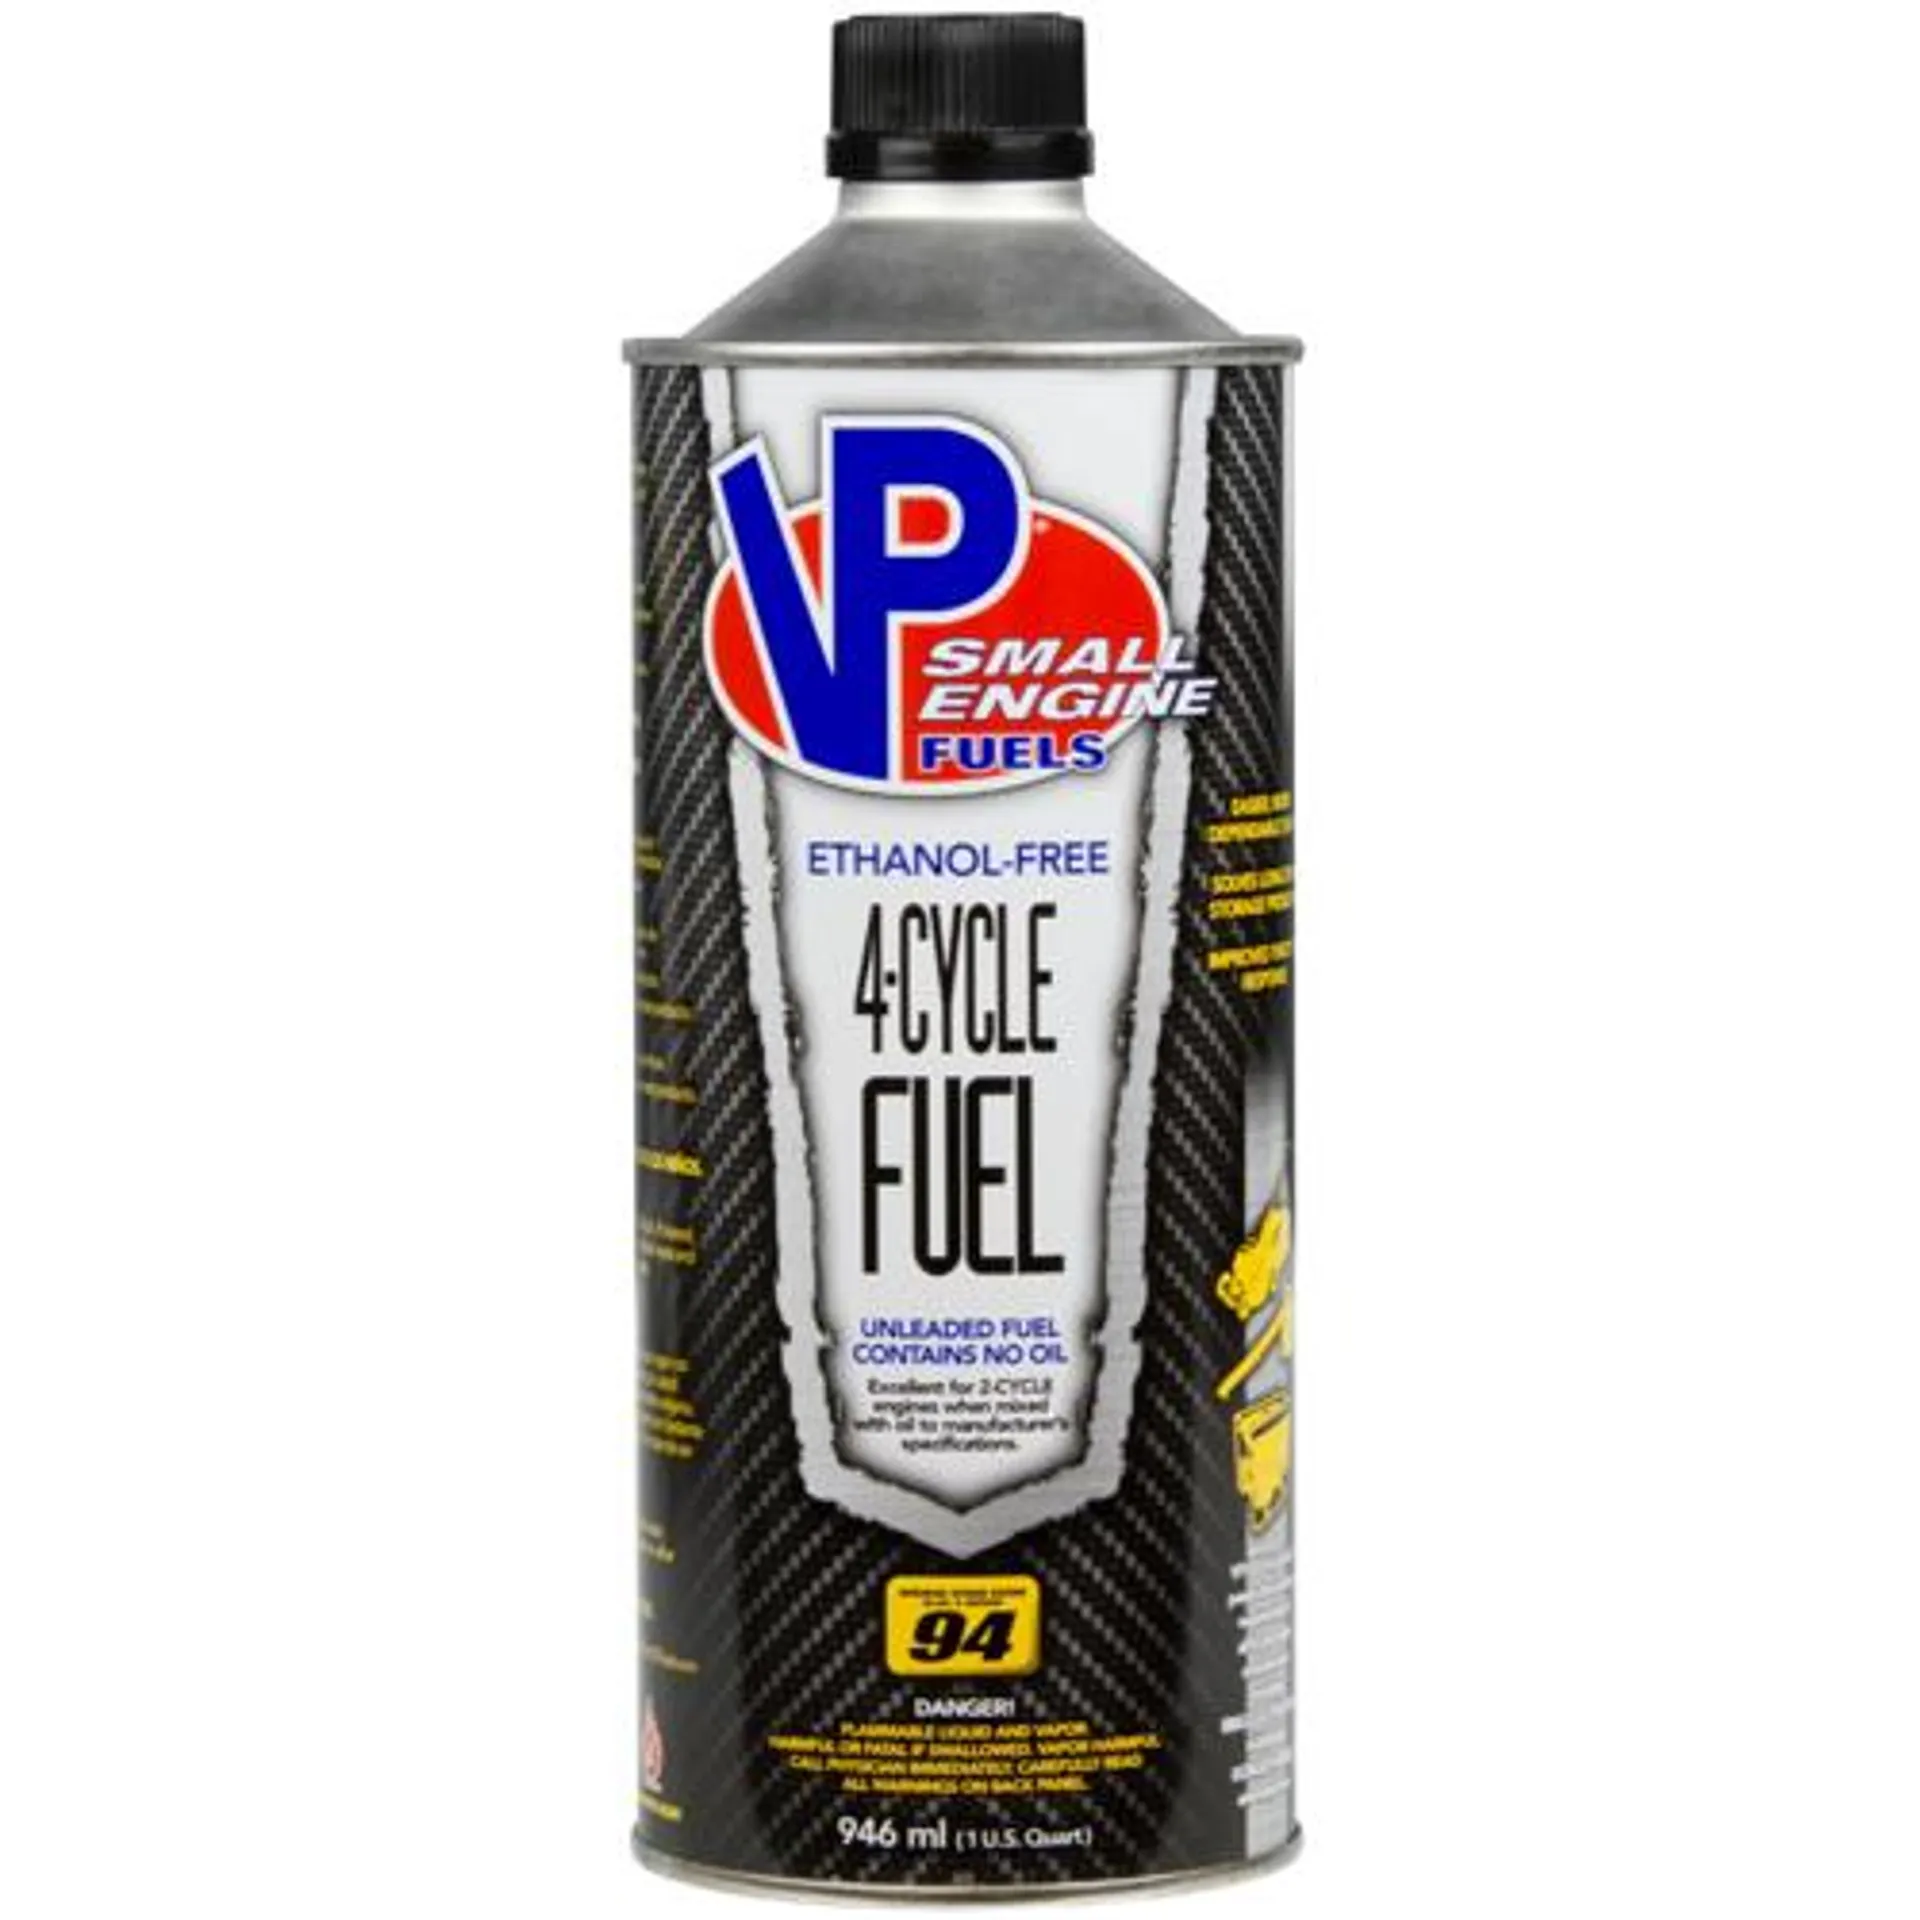 VP Racing Fuels 4-Cycle Ethanol-Free Small Engine Fuel